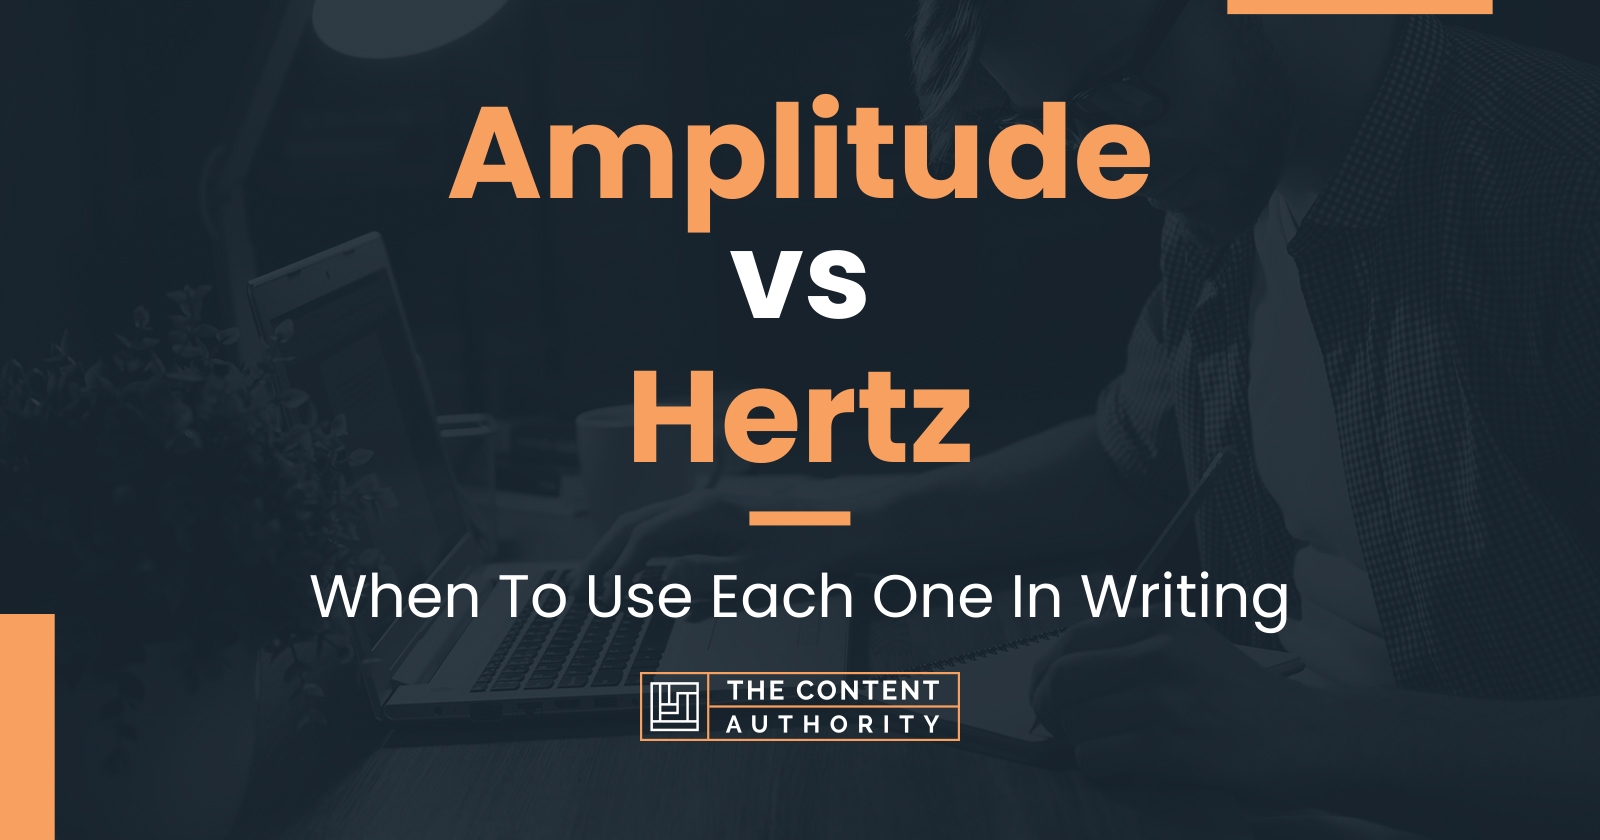 Amplitude vs Hertz: When To Use Each One In Writing